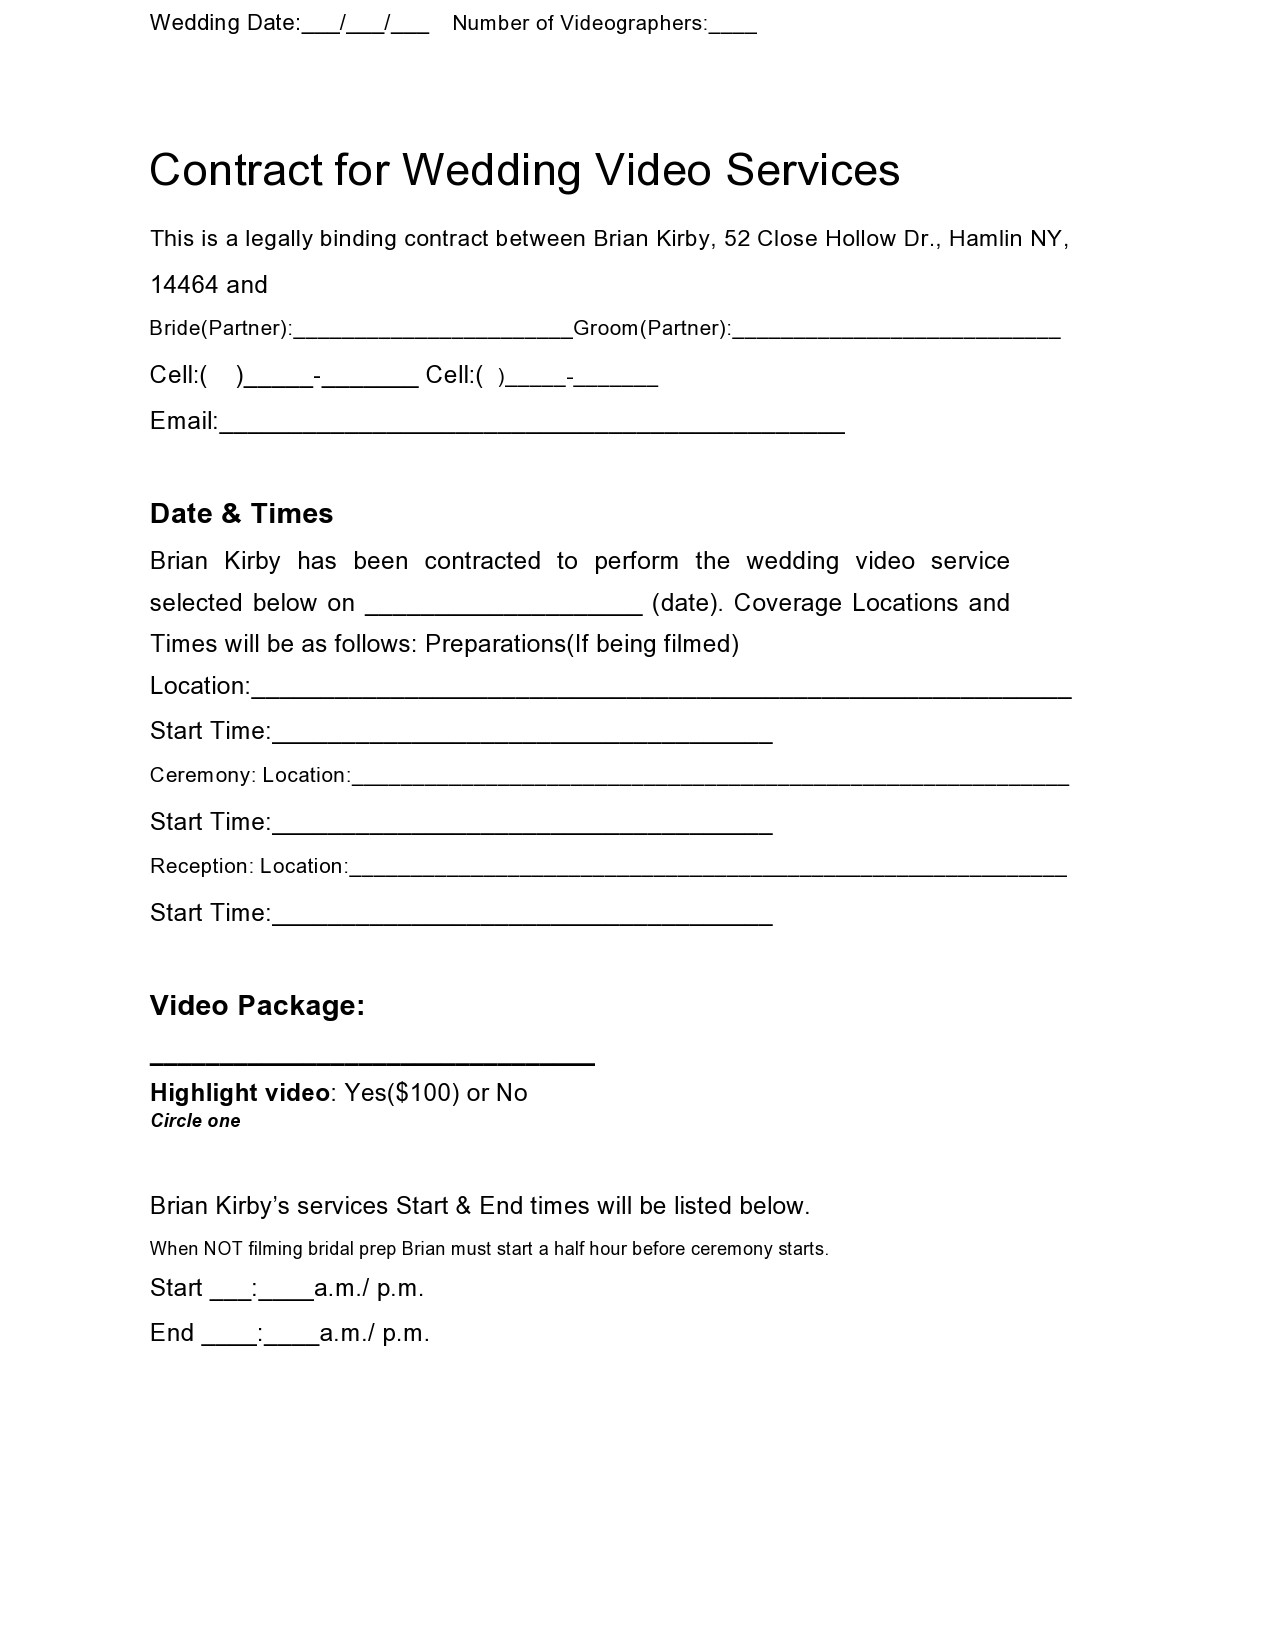 Free videography contract 19